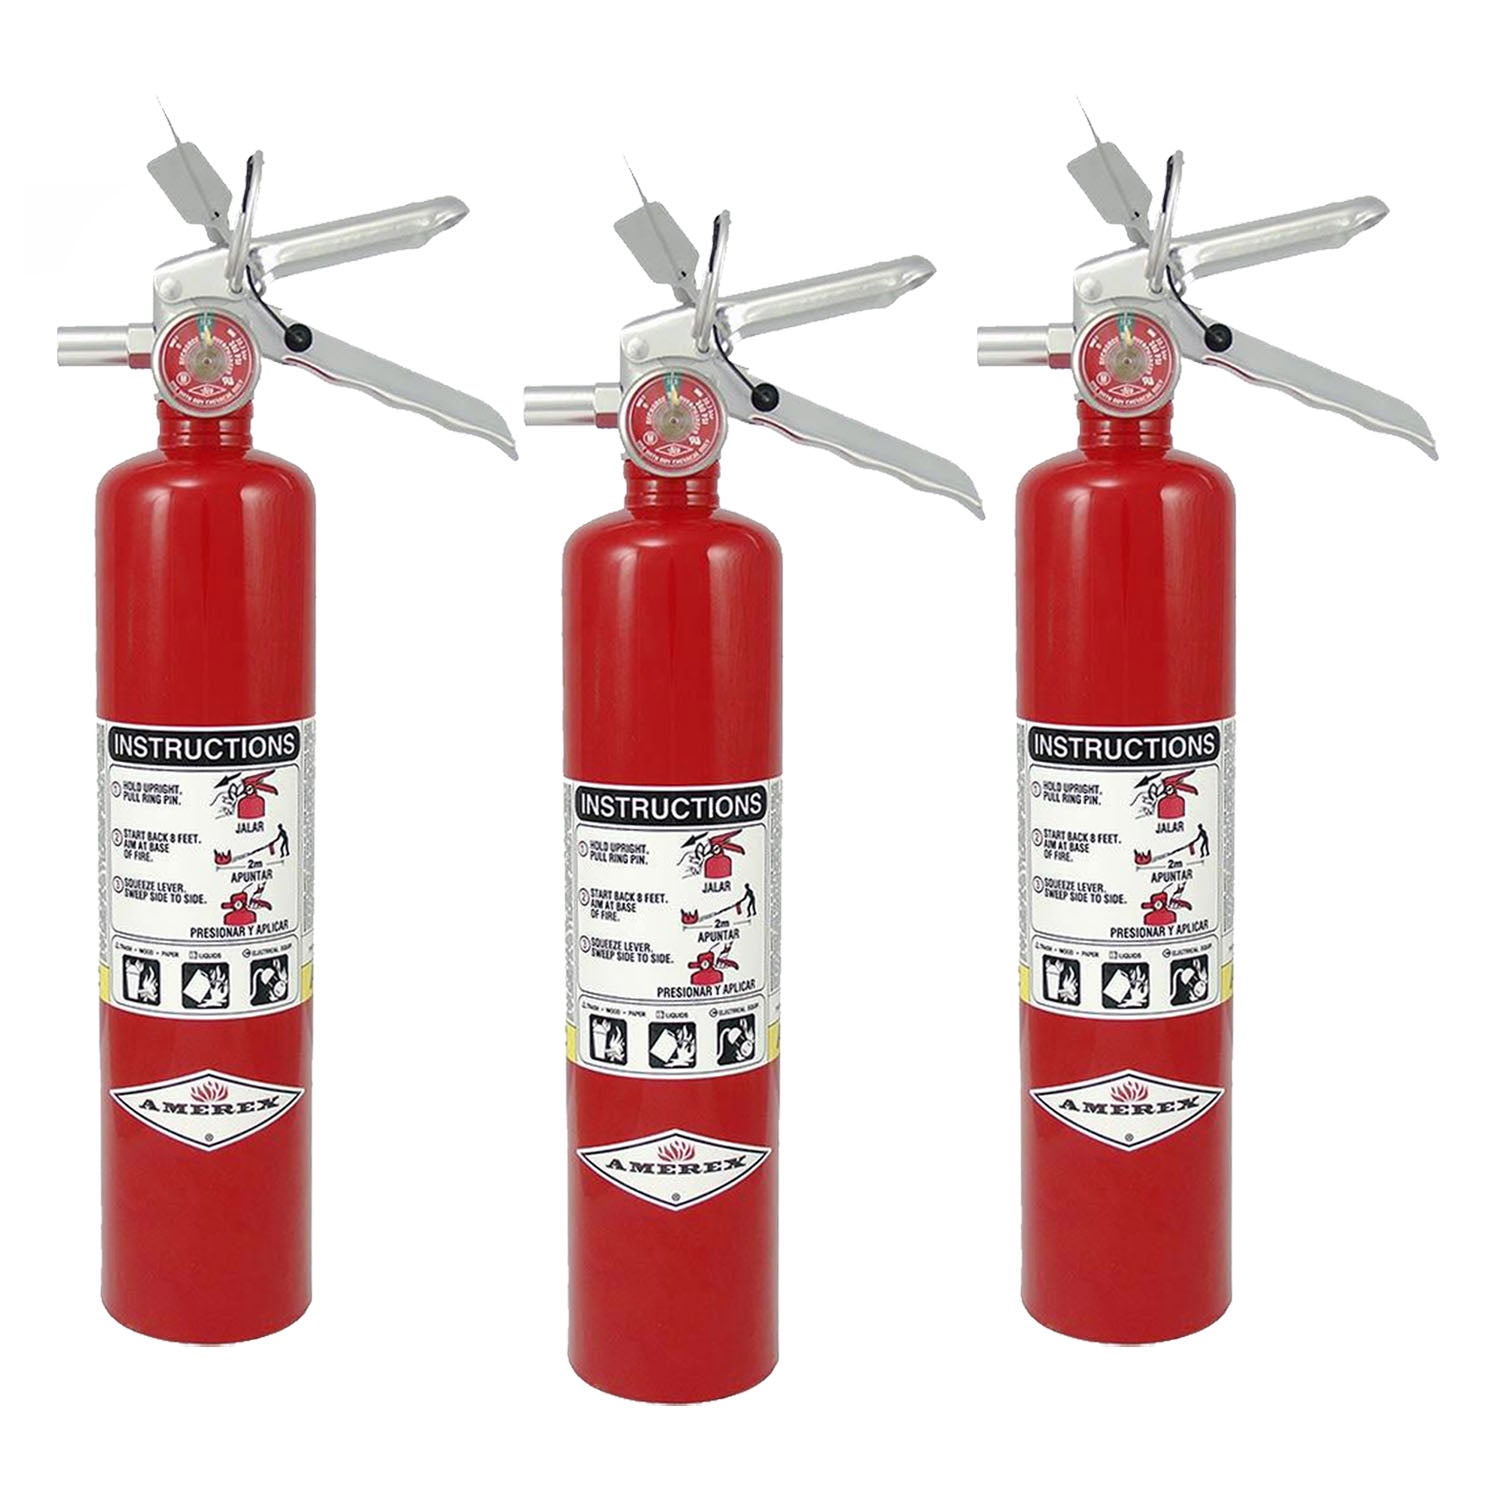 Amerex Dry Chemical Fire Extinguisher - B417T - 2.5 Pounds - 3 Pack - Pro-Distributing